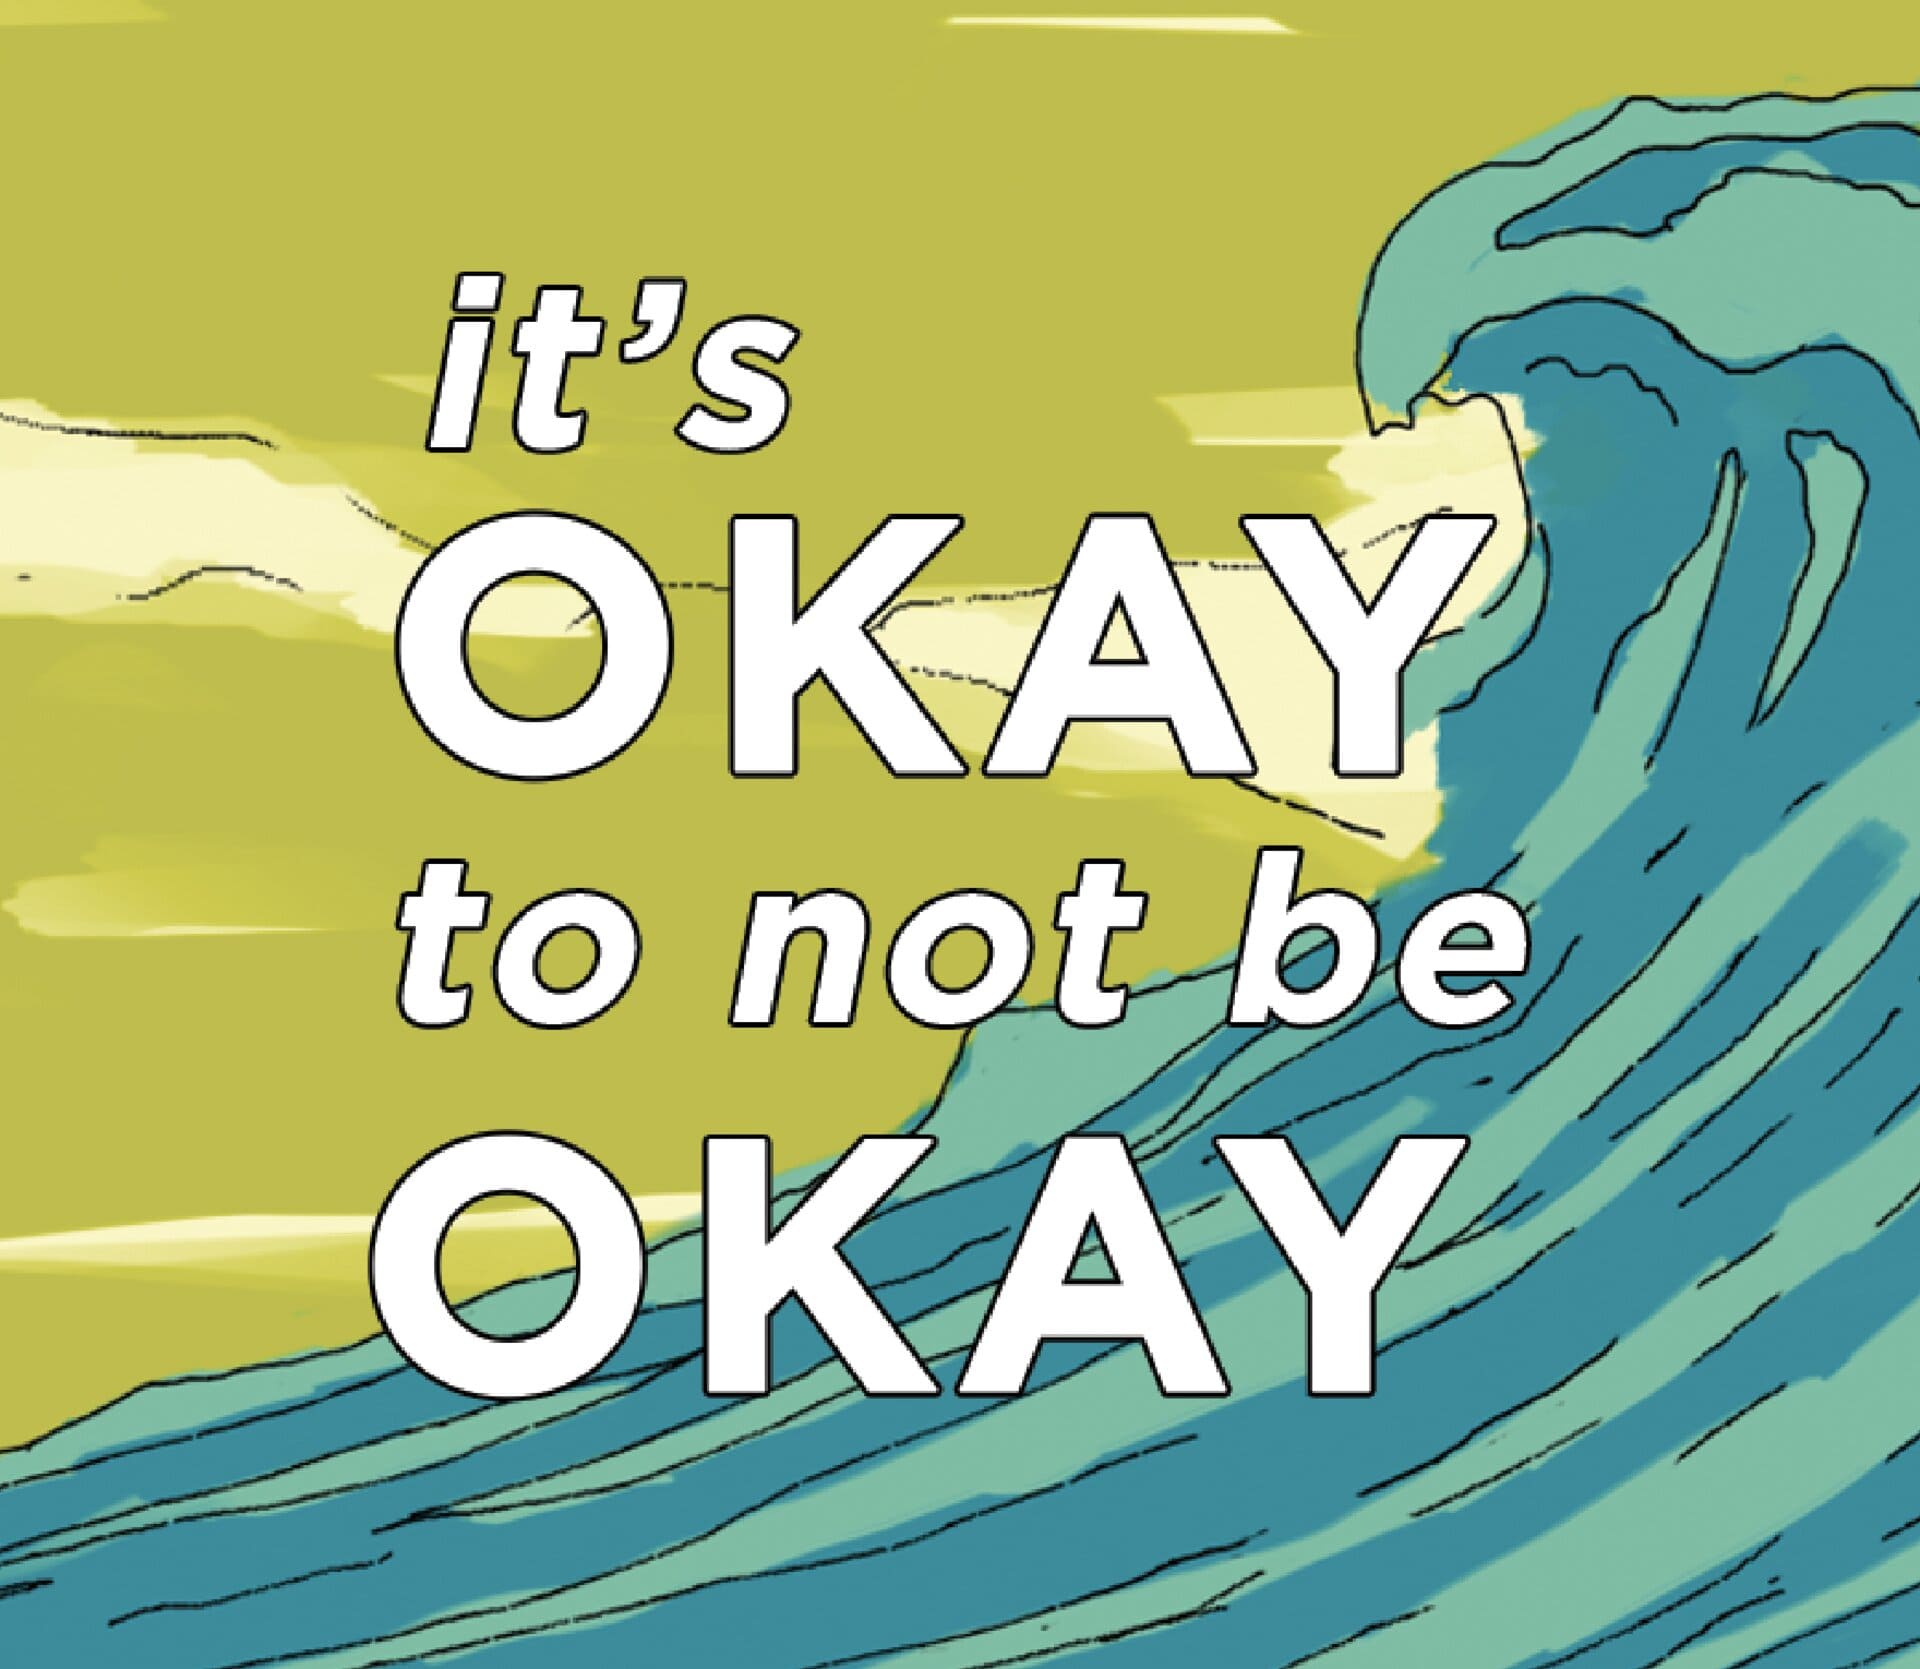 An illustration of a blue wave against a green sky. The text "it's OKAY to not be OKAY" is overlayed on top of the centre of the illustration.